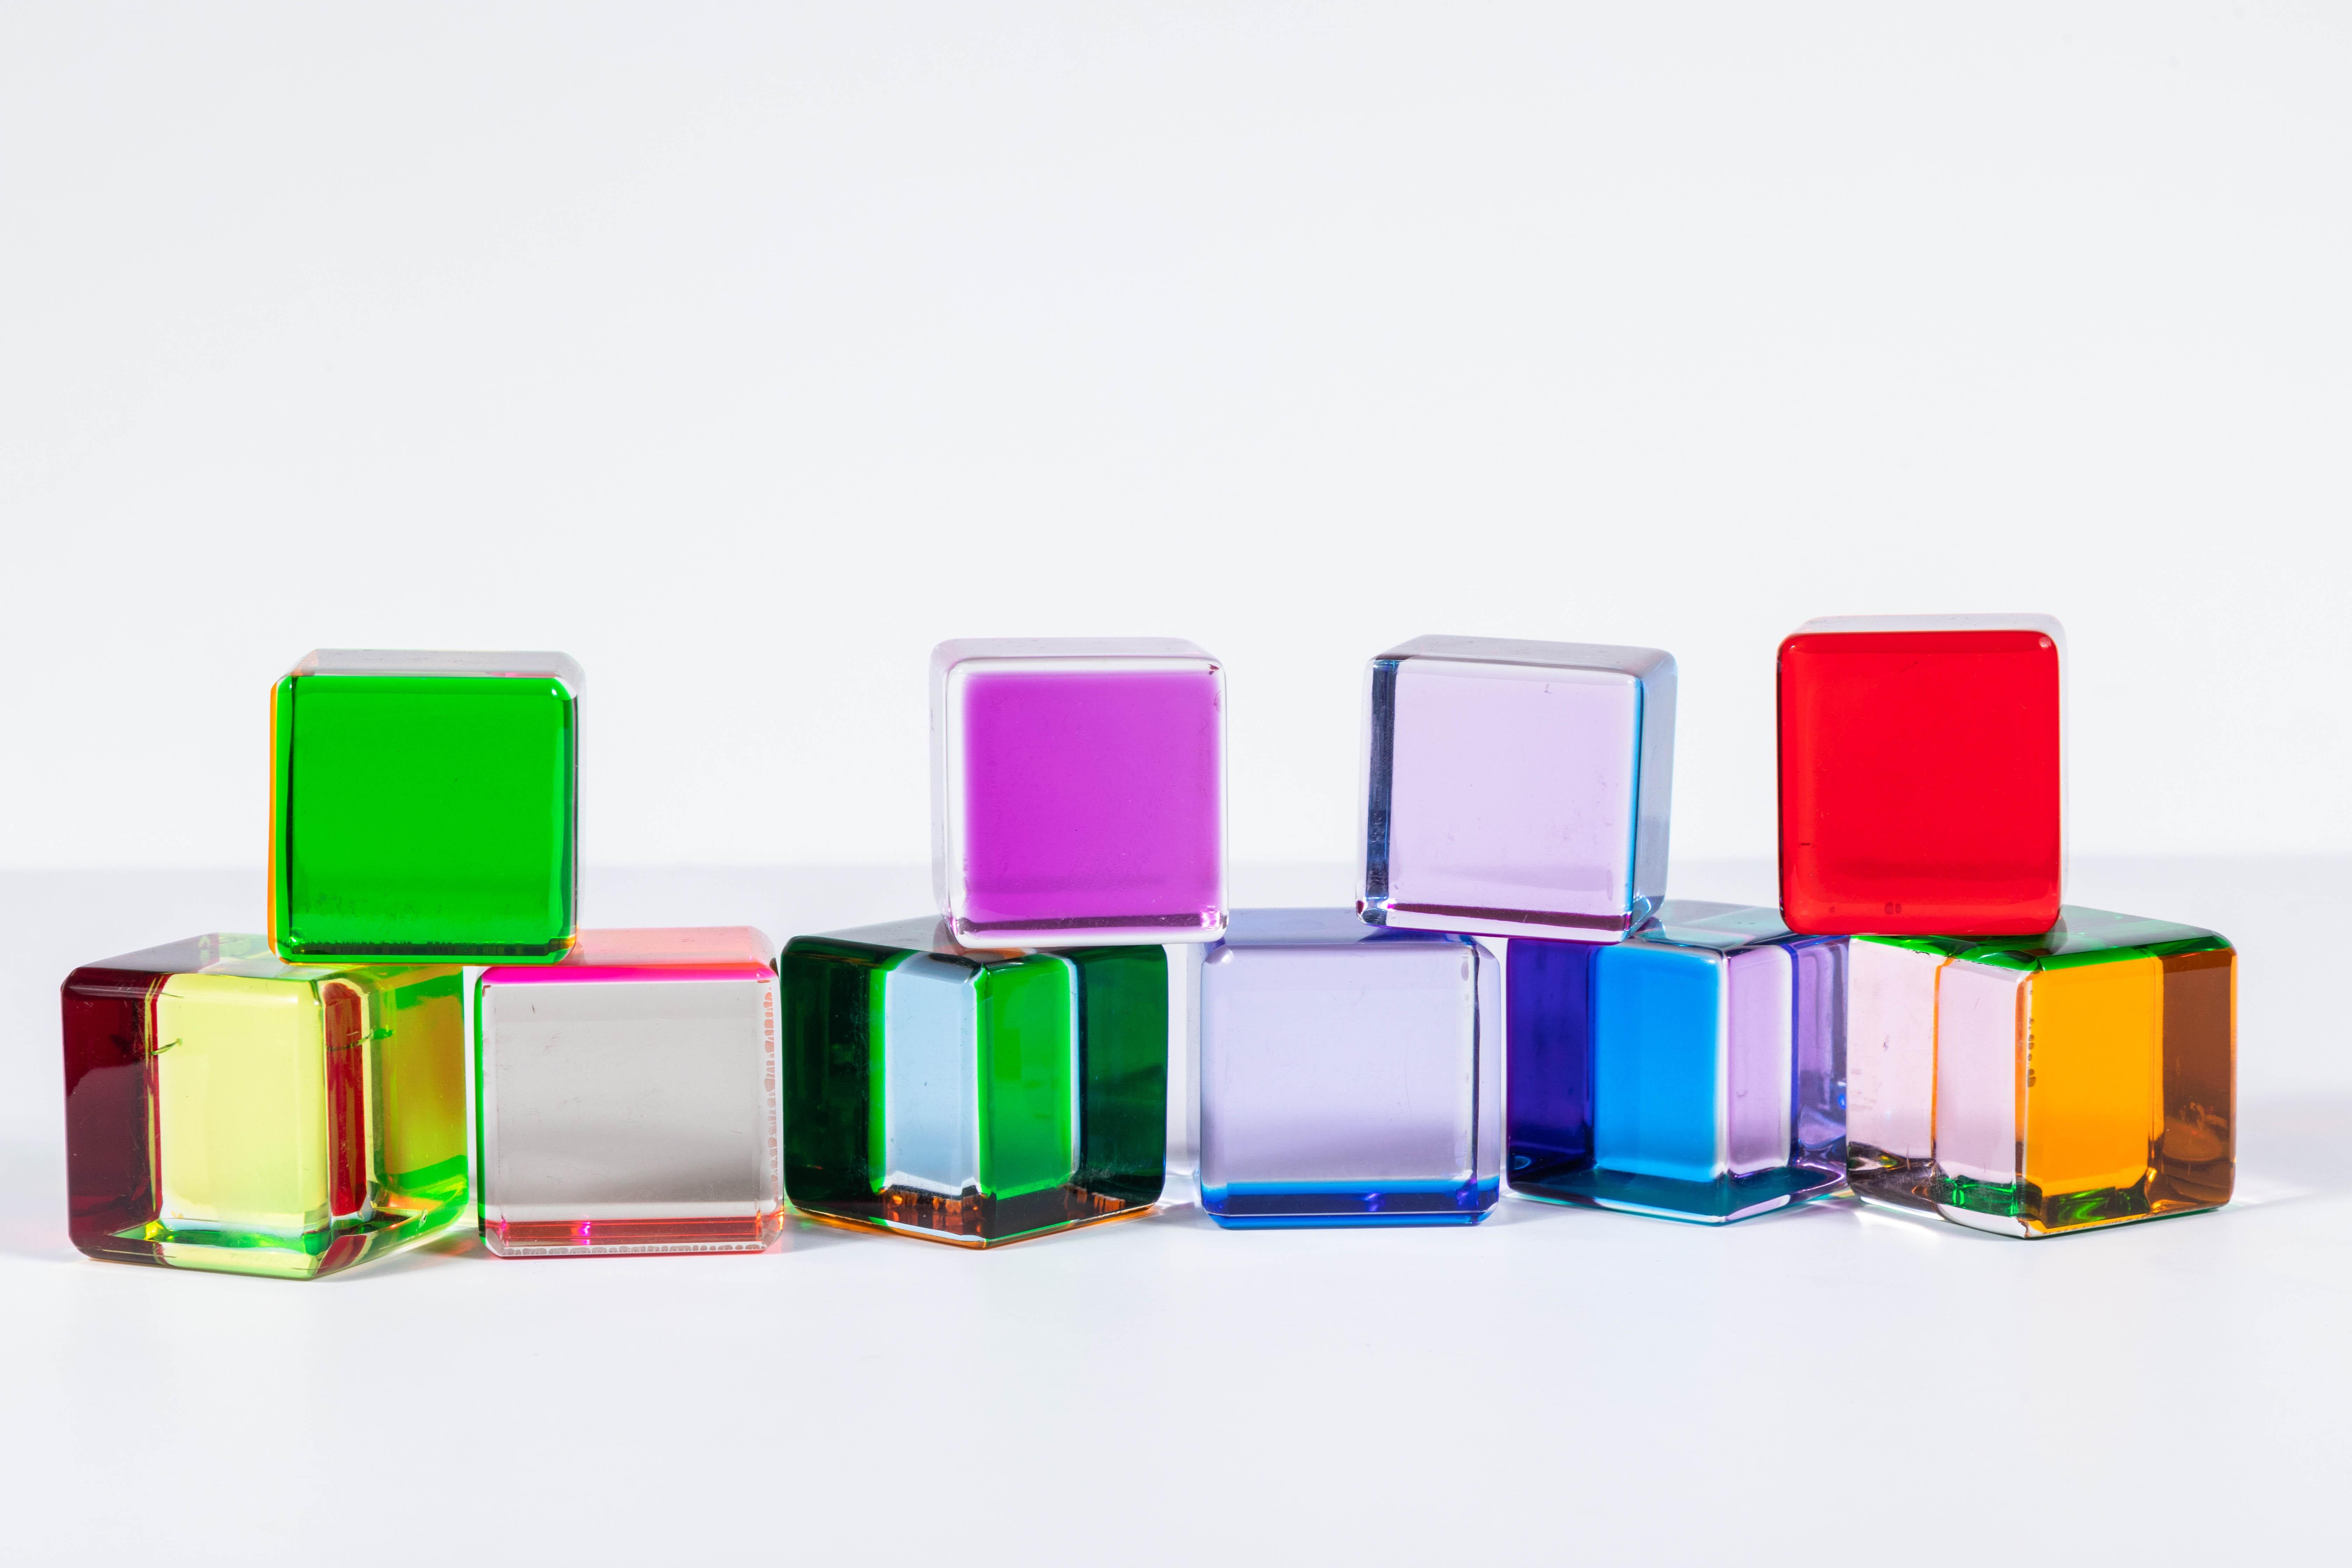 Macedonian Set of 10 Colored Lucite Cubes by Vasa Mihich